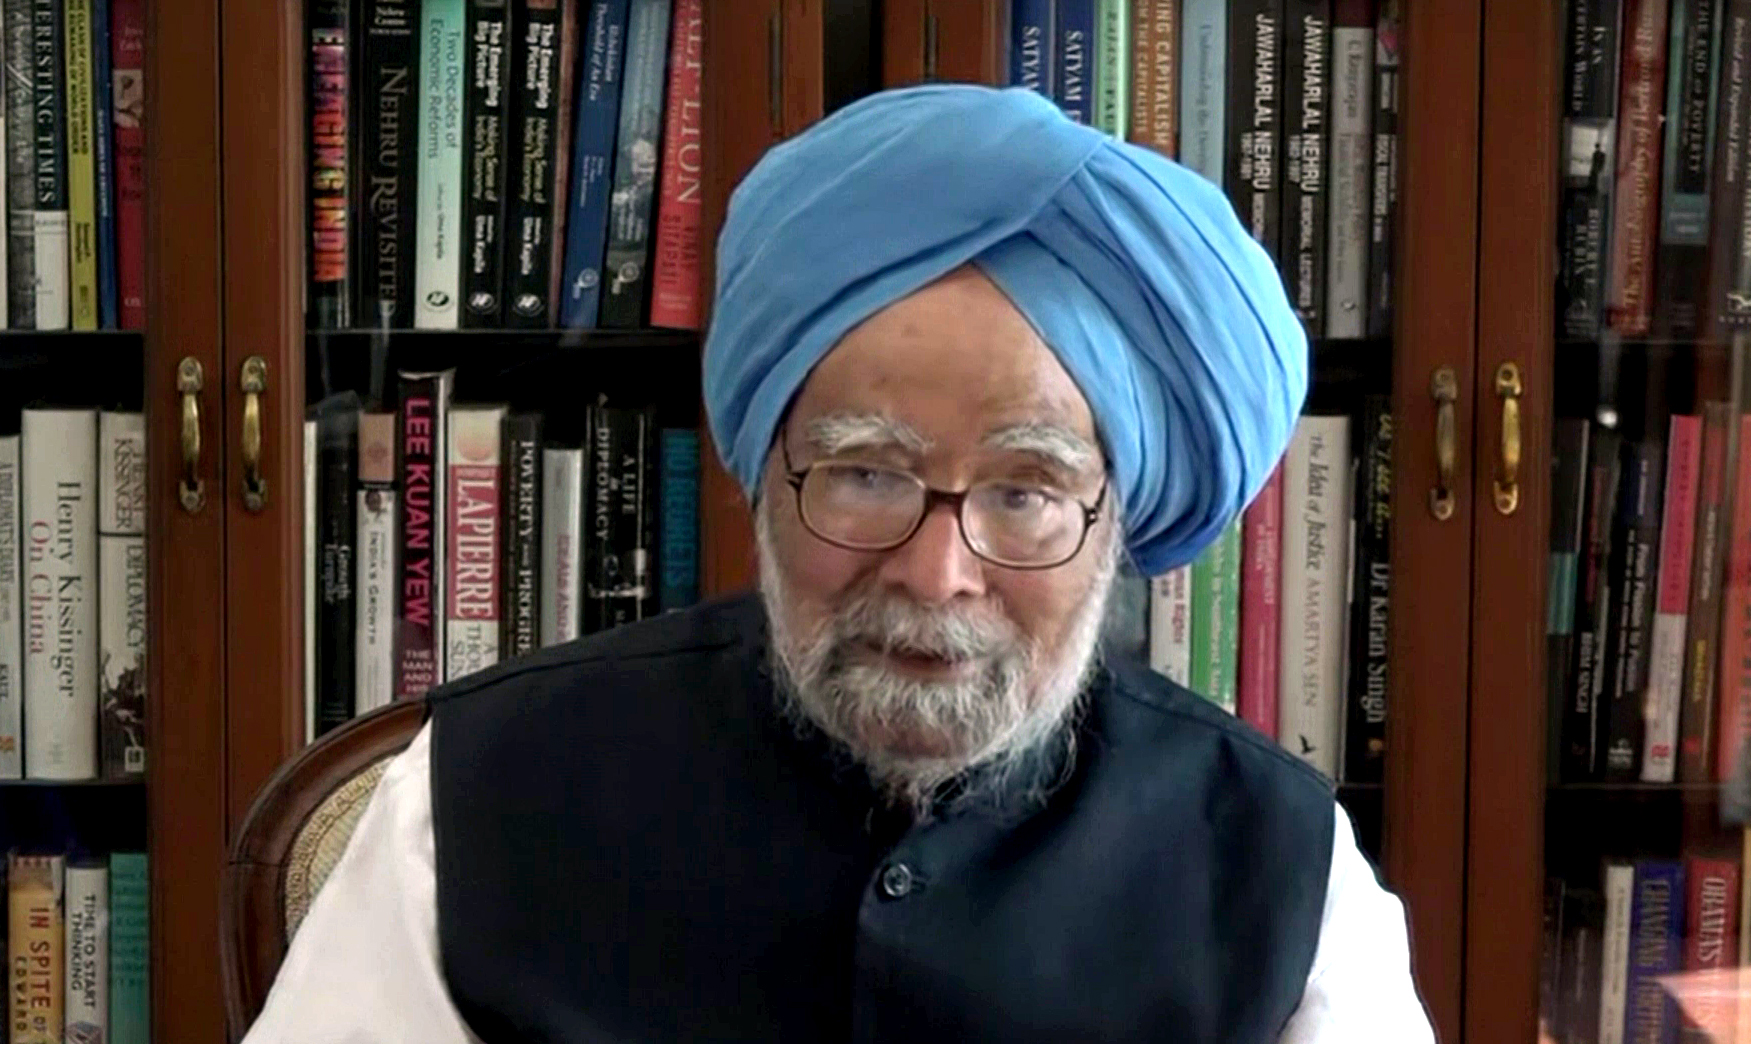 India has done the right thing, says Manmohan Singh as he backs nation’s Russia-Ukraine stance 